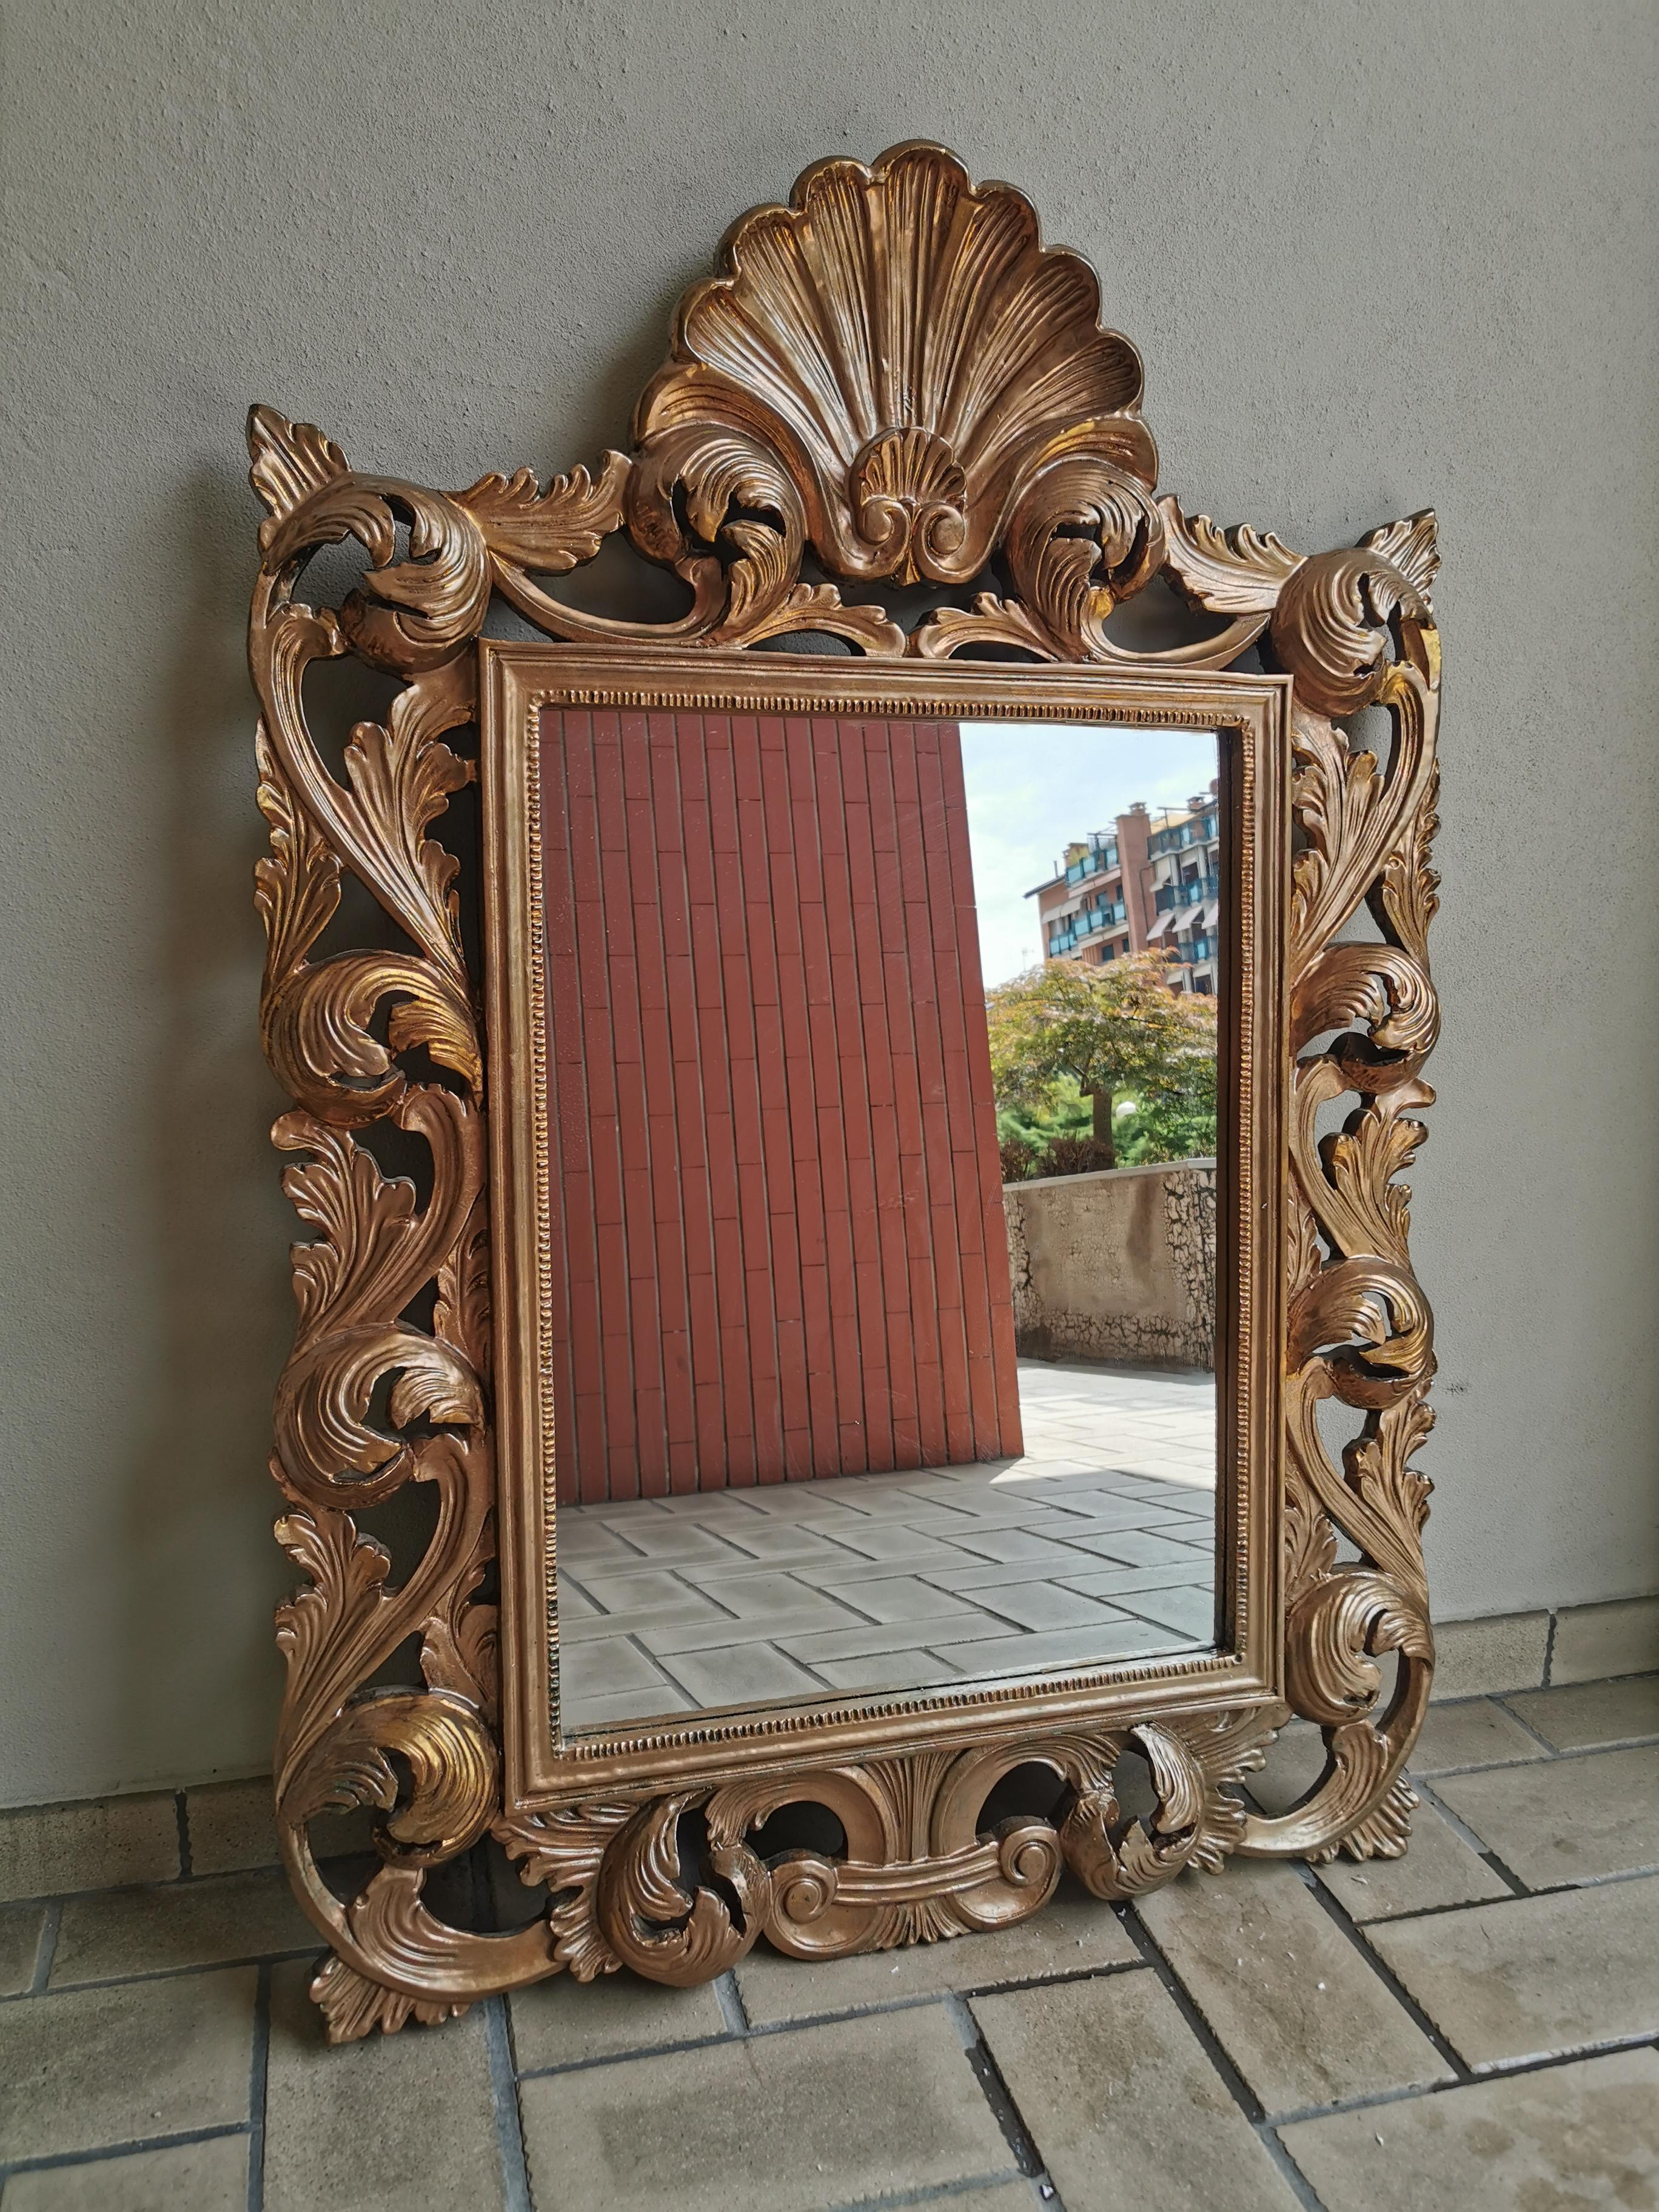 Golden Framed Hand Crafted Wood Gilded Wall Mirror Early XX. Century Italy
Big dimension Italian Wall Mirror in very good condition . 
Golden frame and hand crafted wood 
rich work on the wood and in very good condition which is difficult to find
I